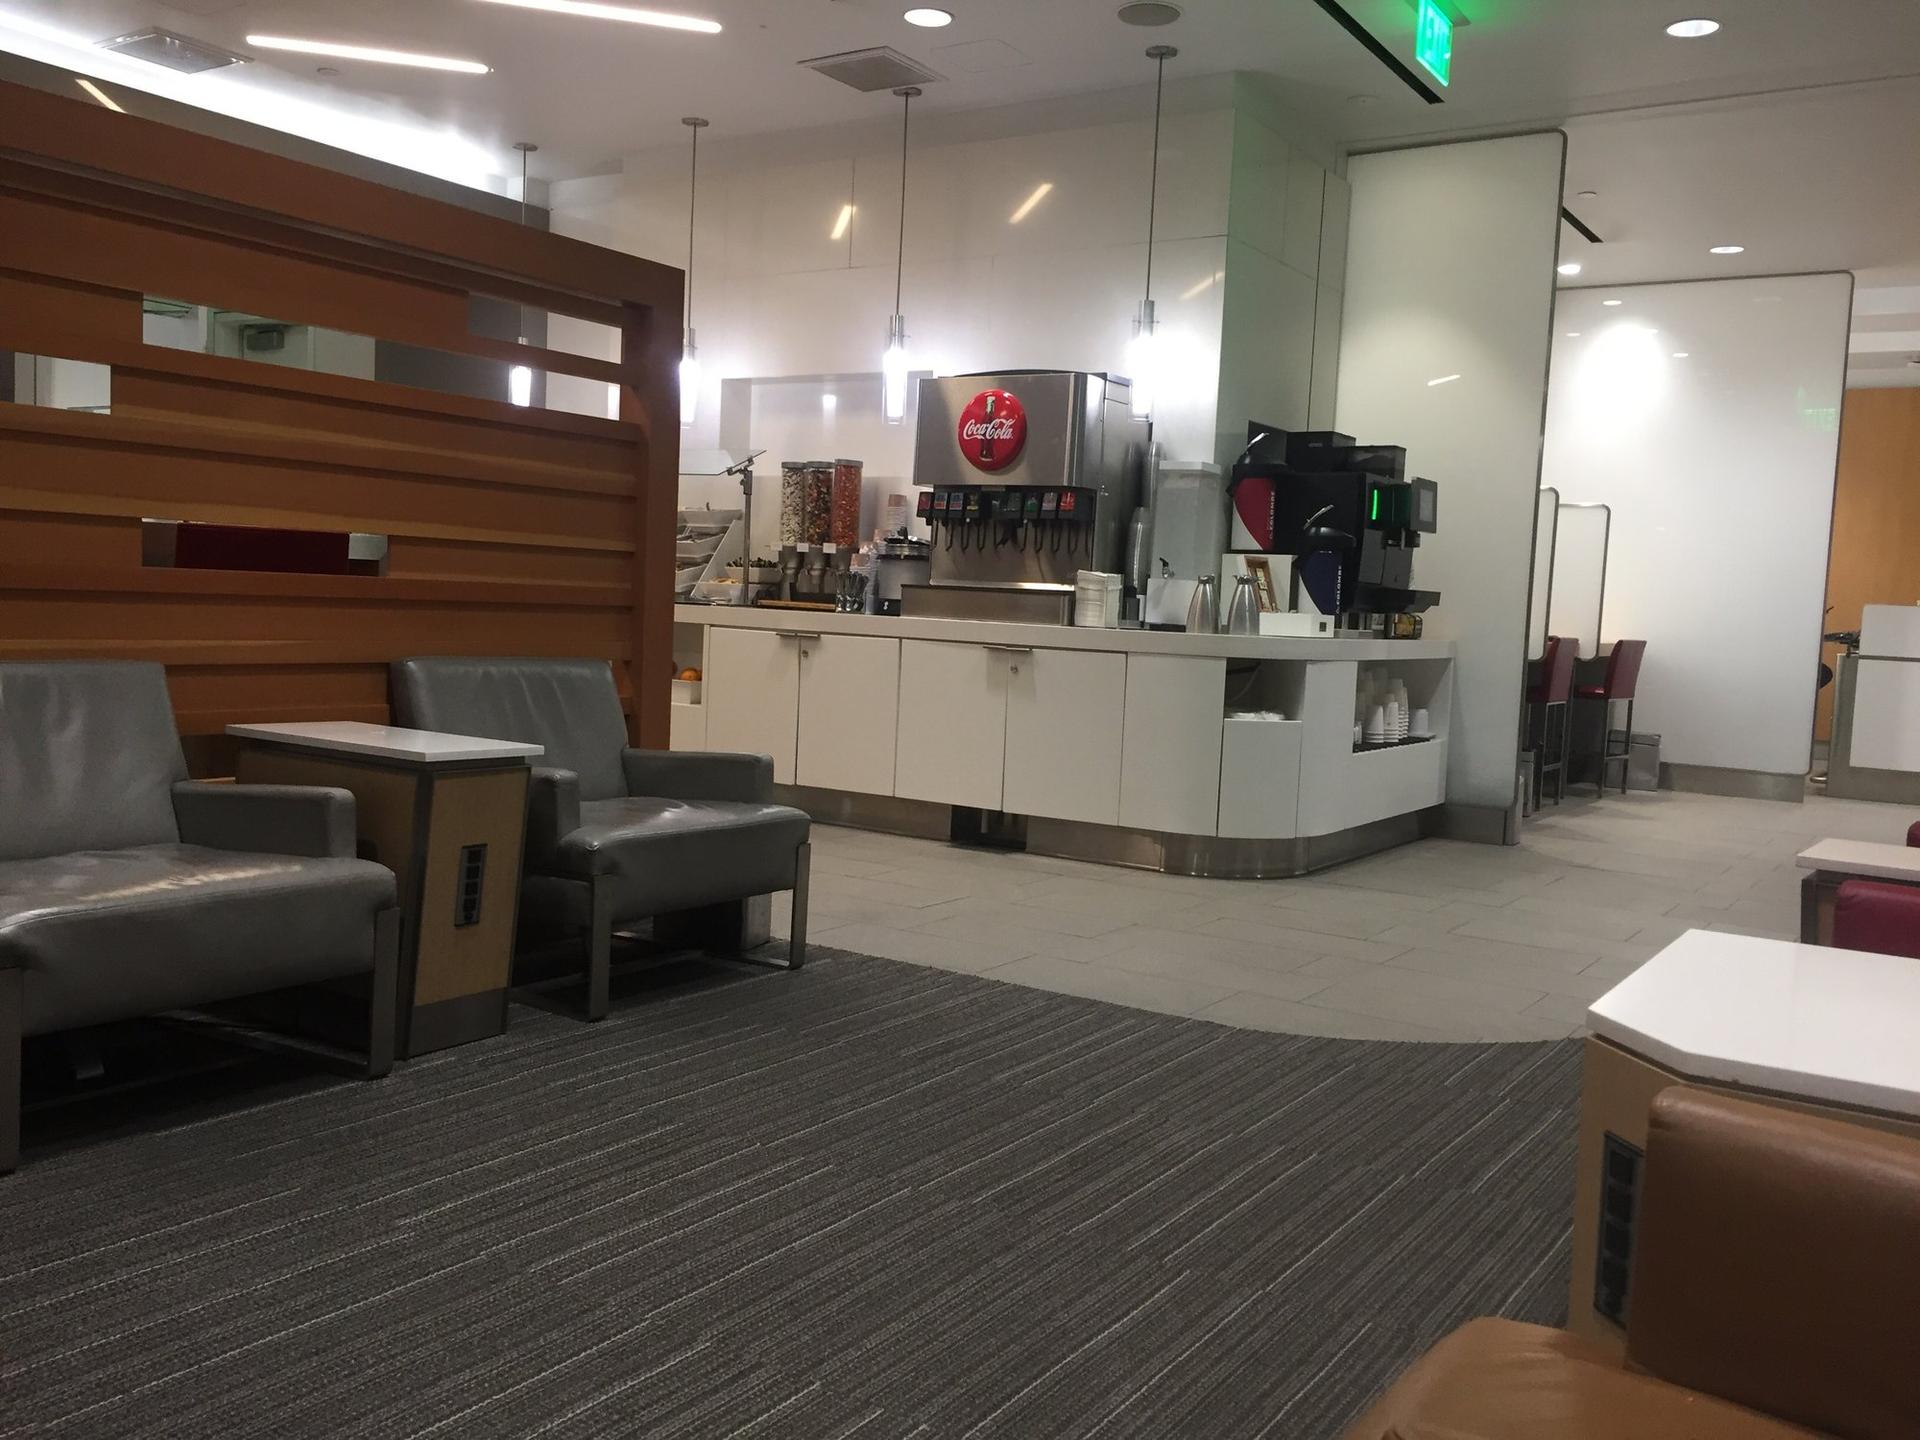 American Airlines Admirals Club image 40 of 43